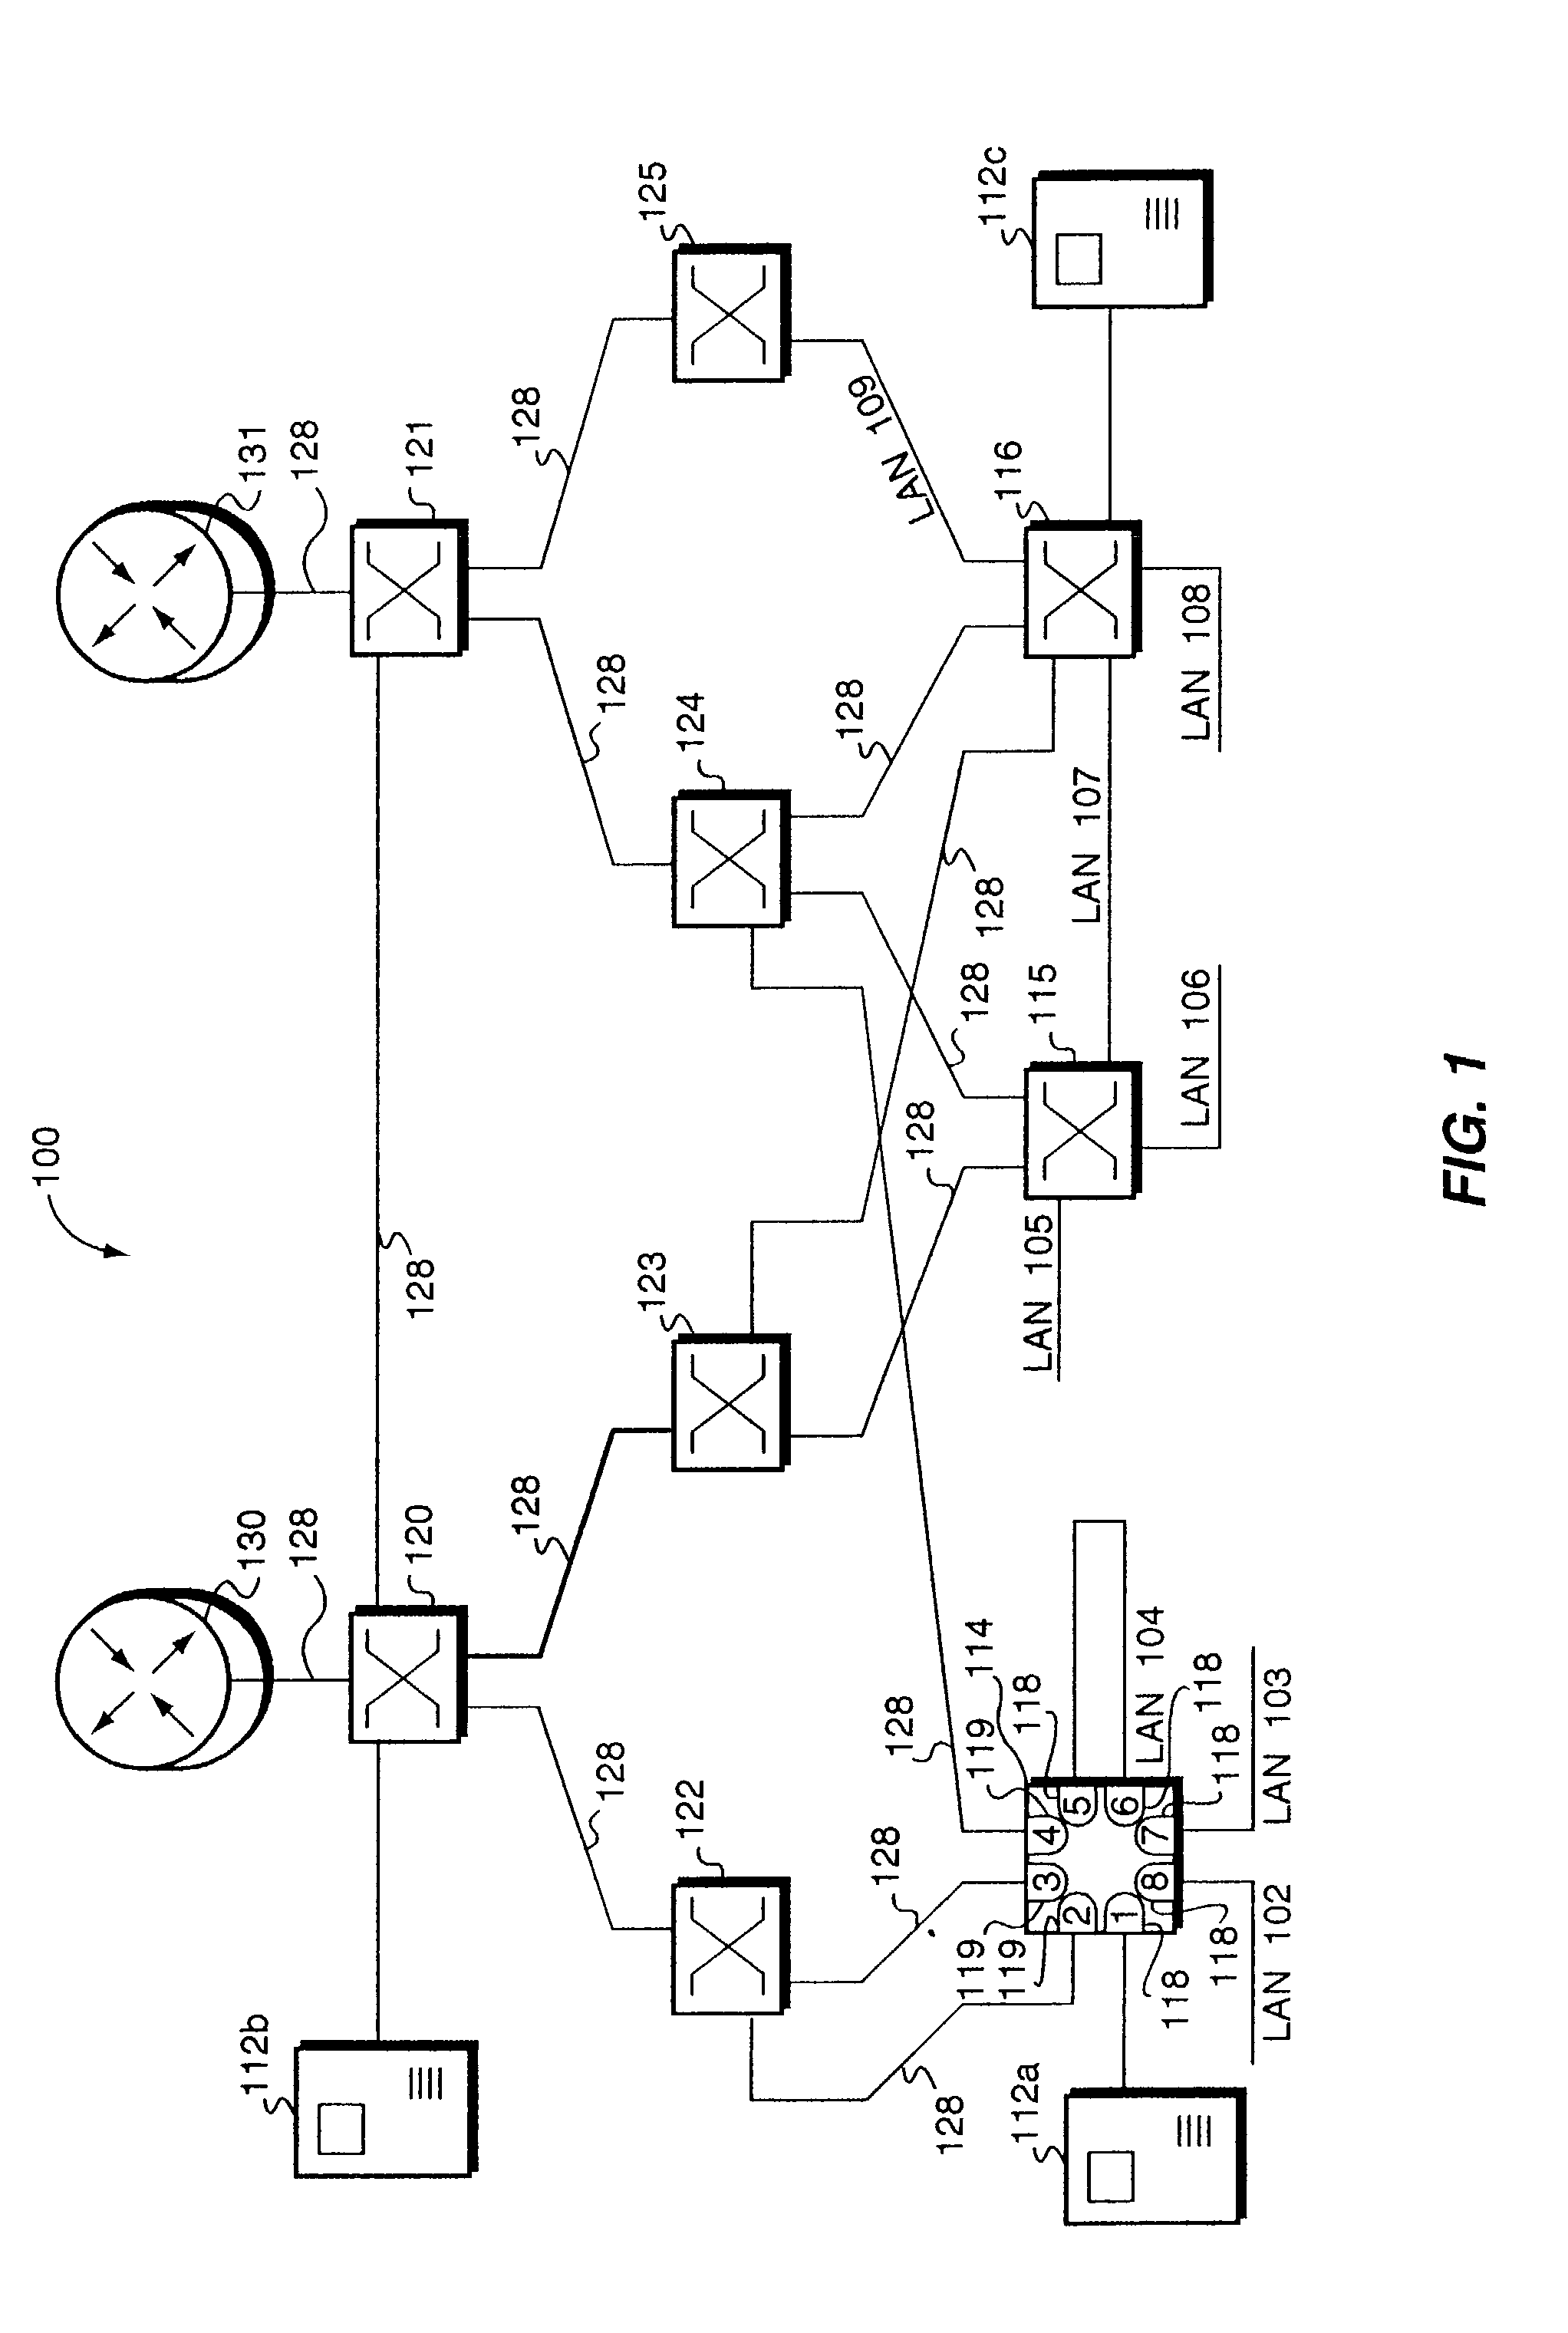 Method and apparatus for rapidly reconfiguring bridged networks using a spanning tree algorithm